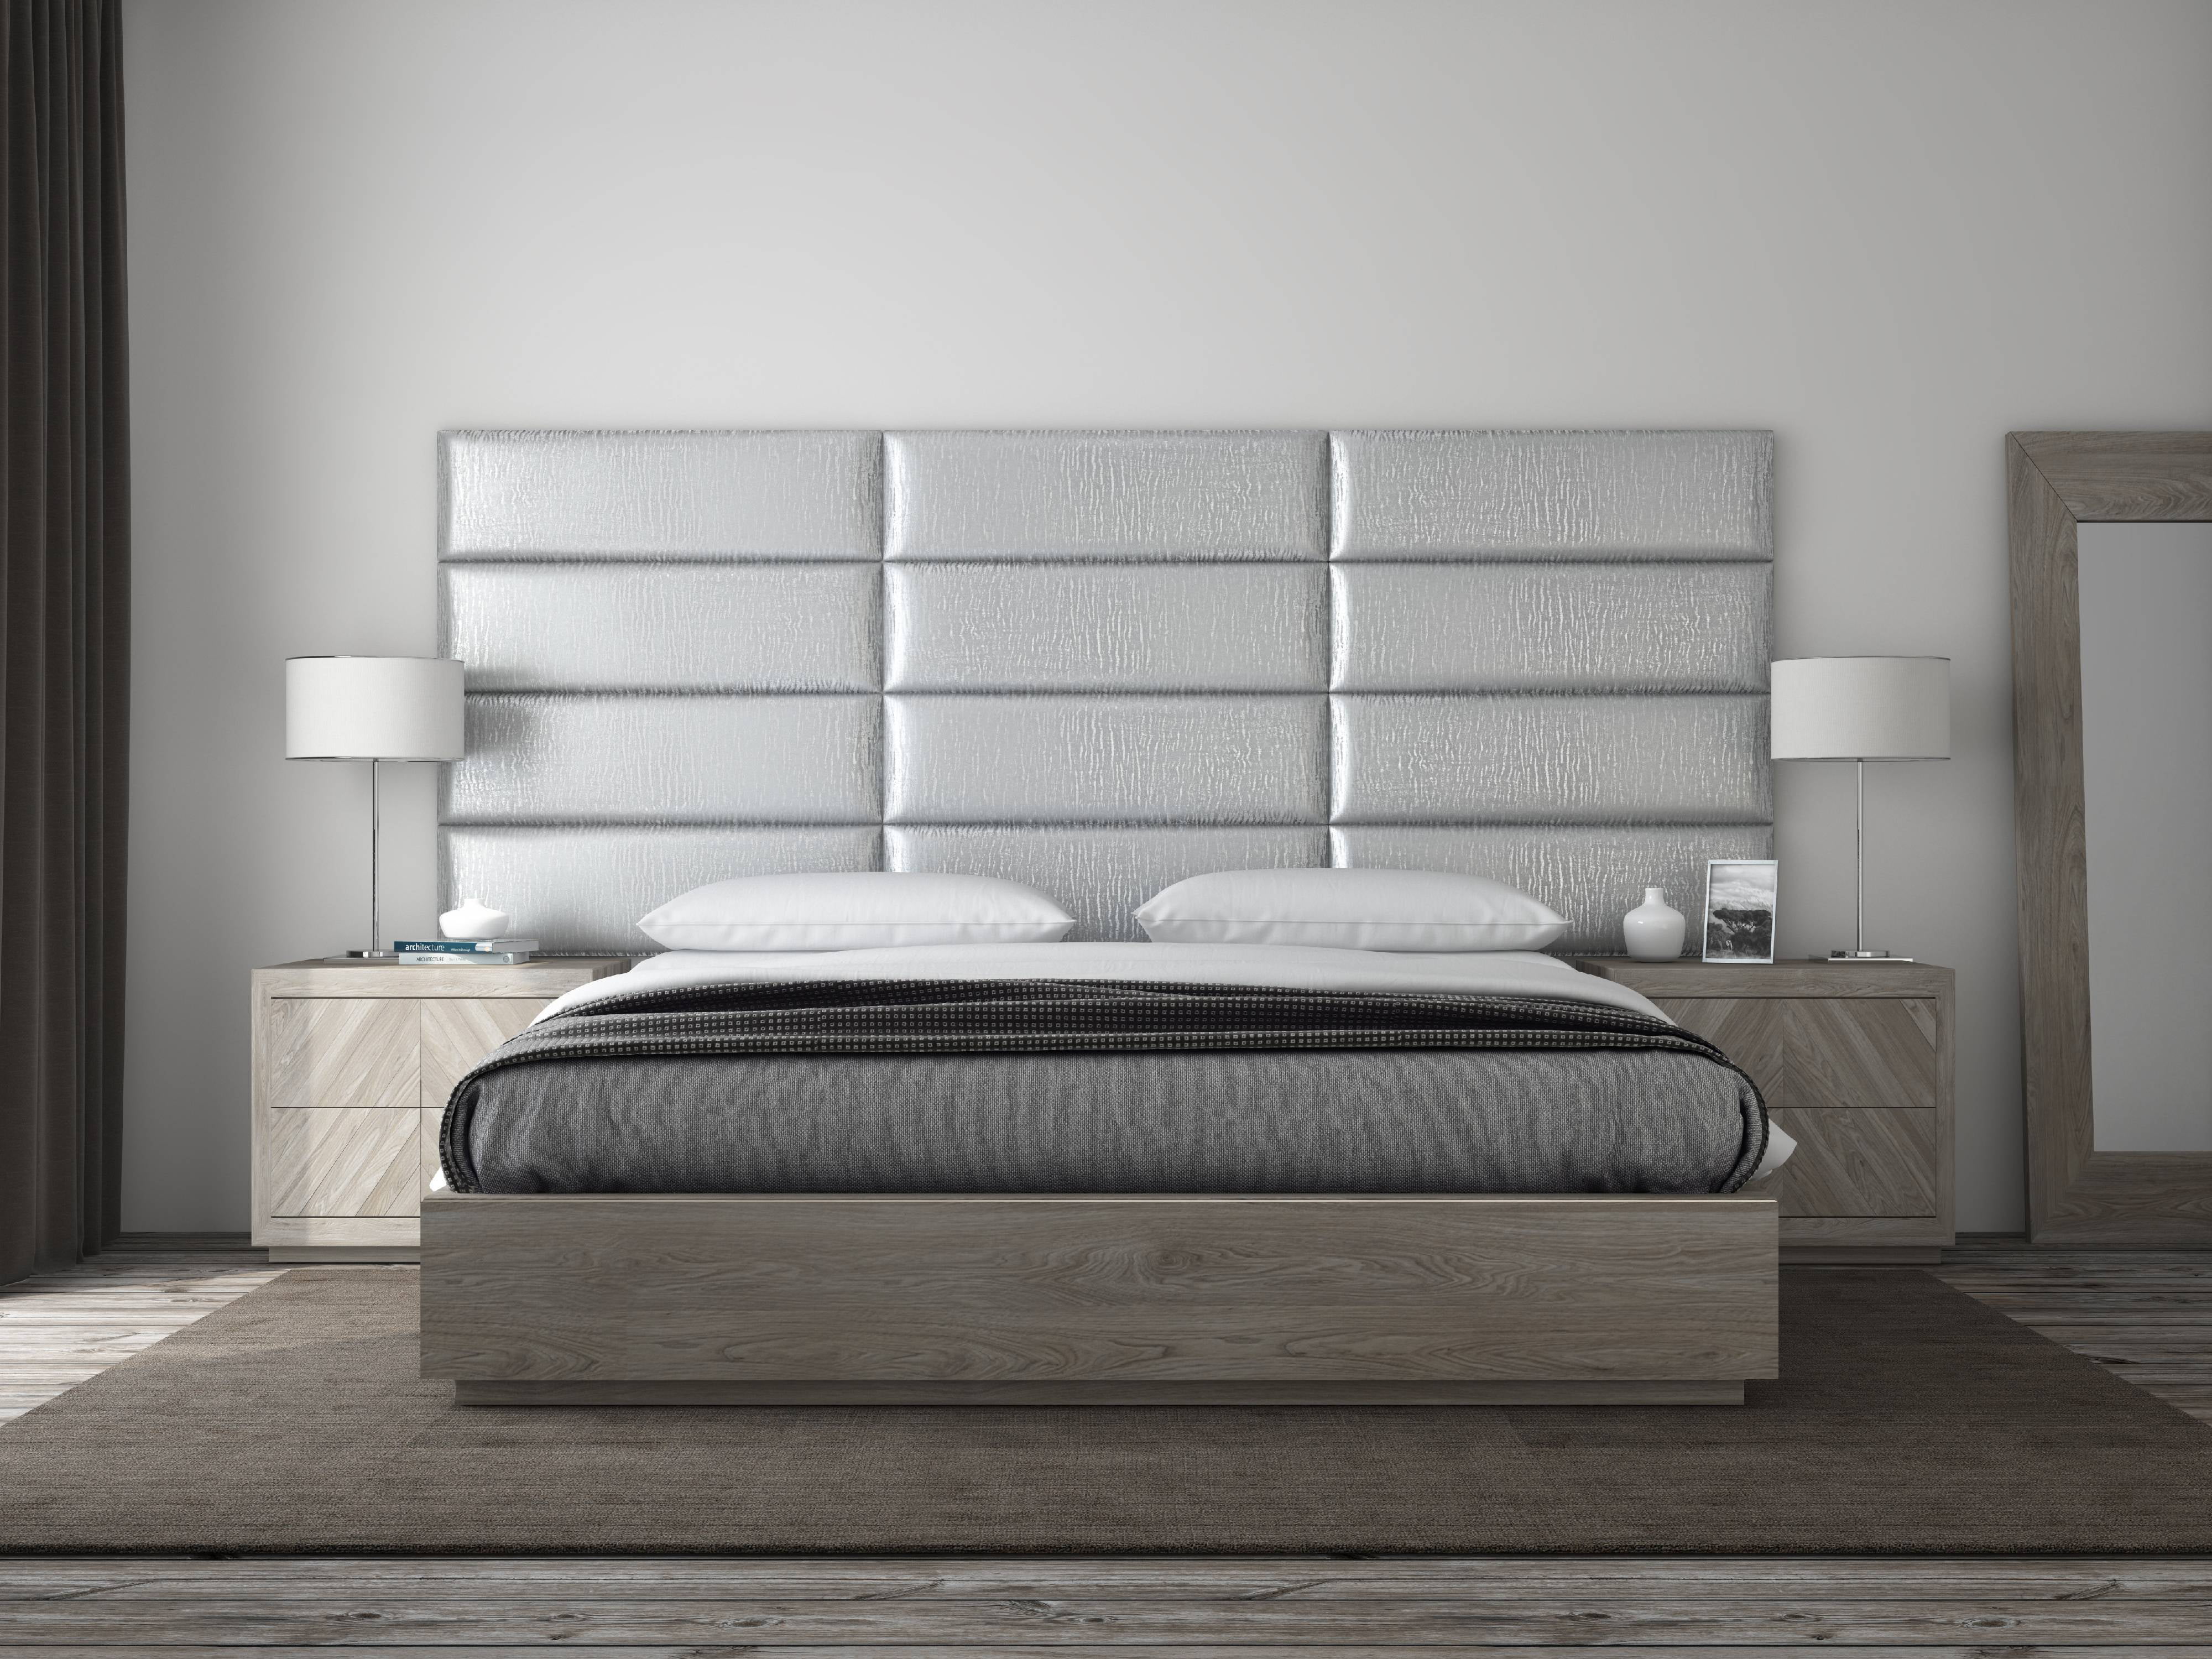 VANT Upholstered Headboards - Accent Wall Panels - Packs Of 4 - Pearl ...